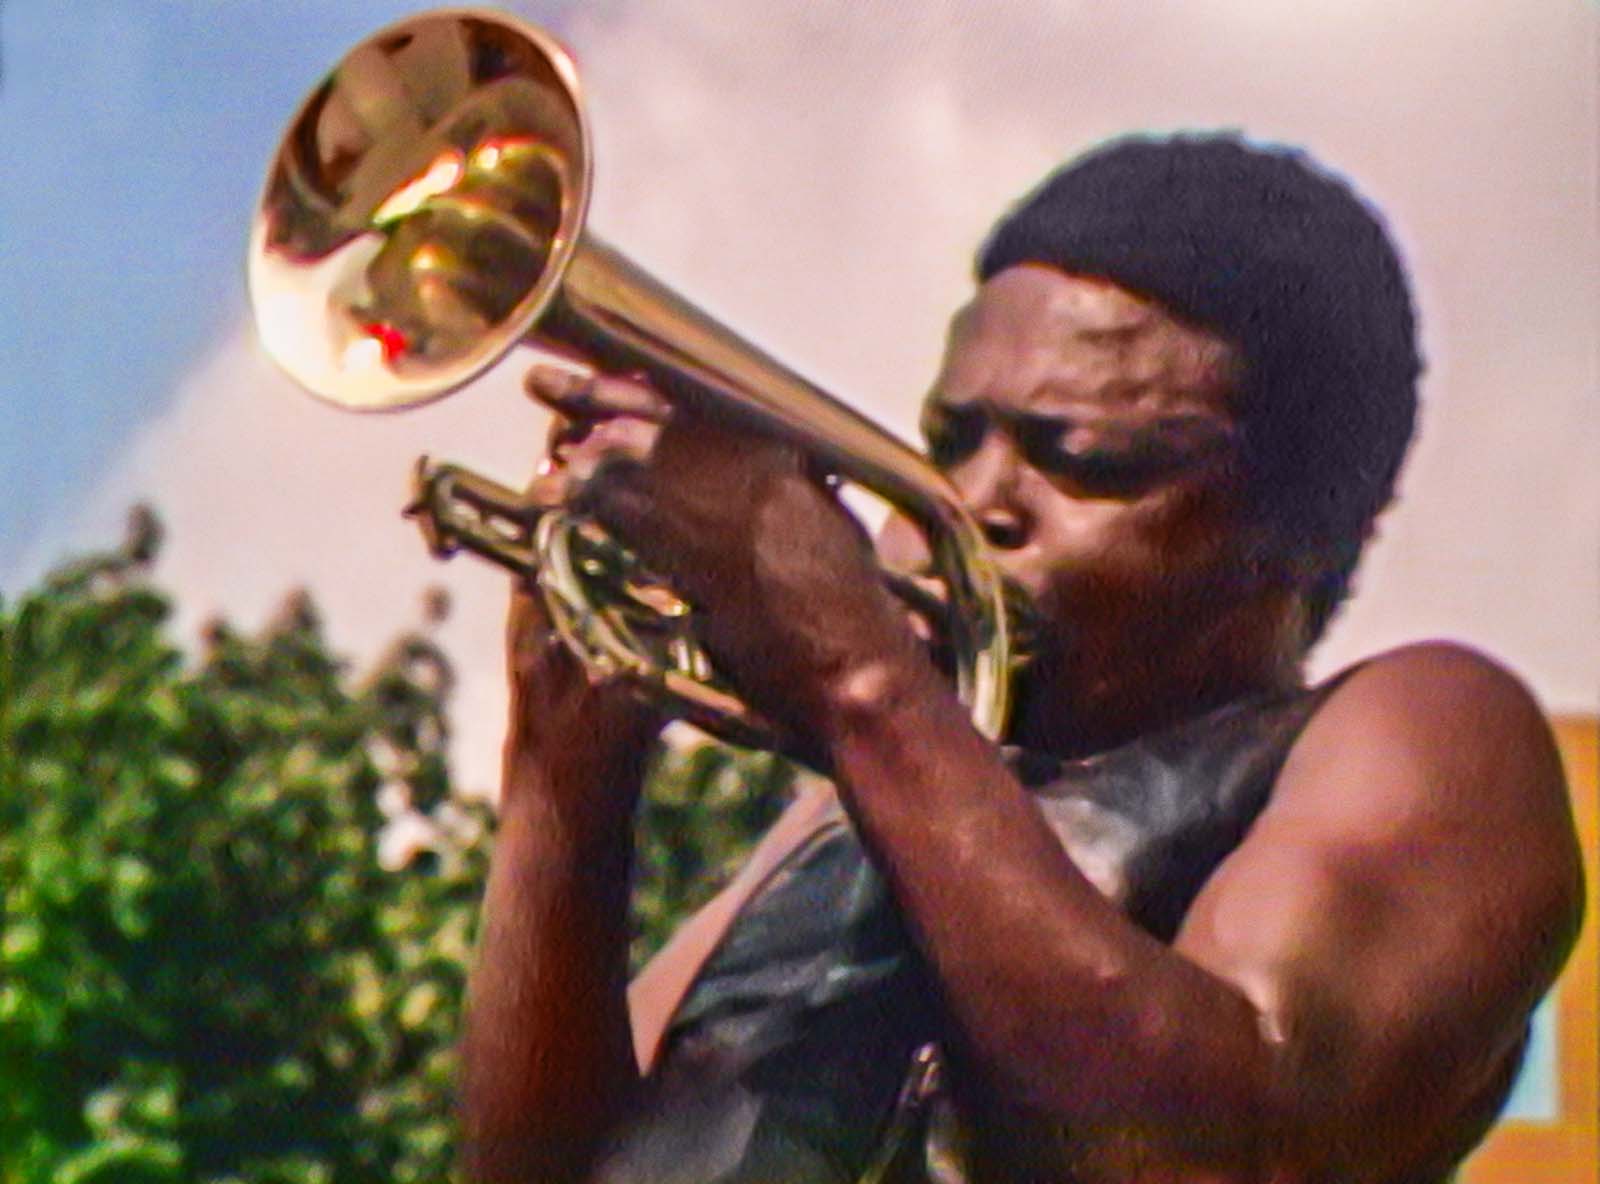 Hugh Masekela plays a mean cornet at the 1969 Harlem Cultural Festival, as featured in Summer of Soul. Image © 20th Century Studios